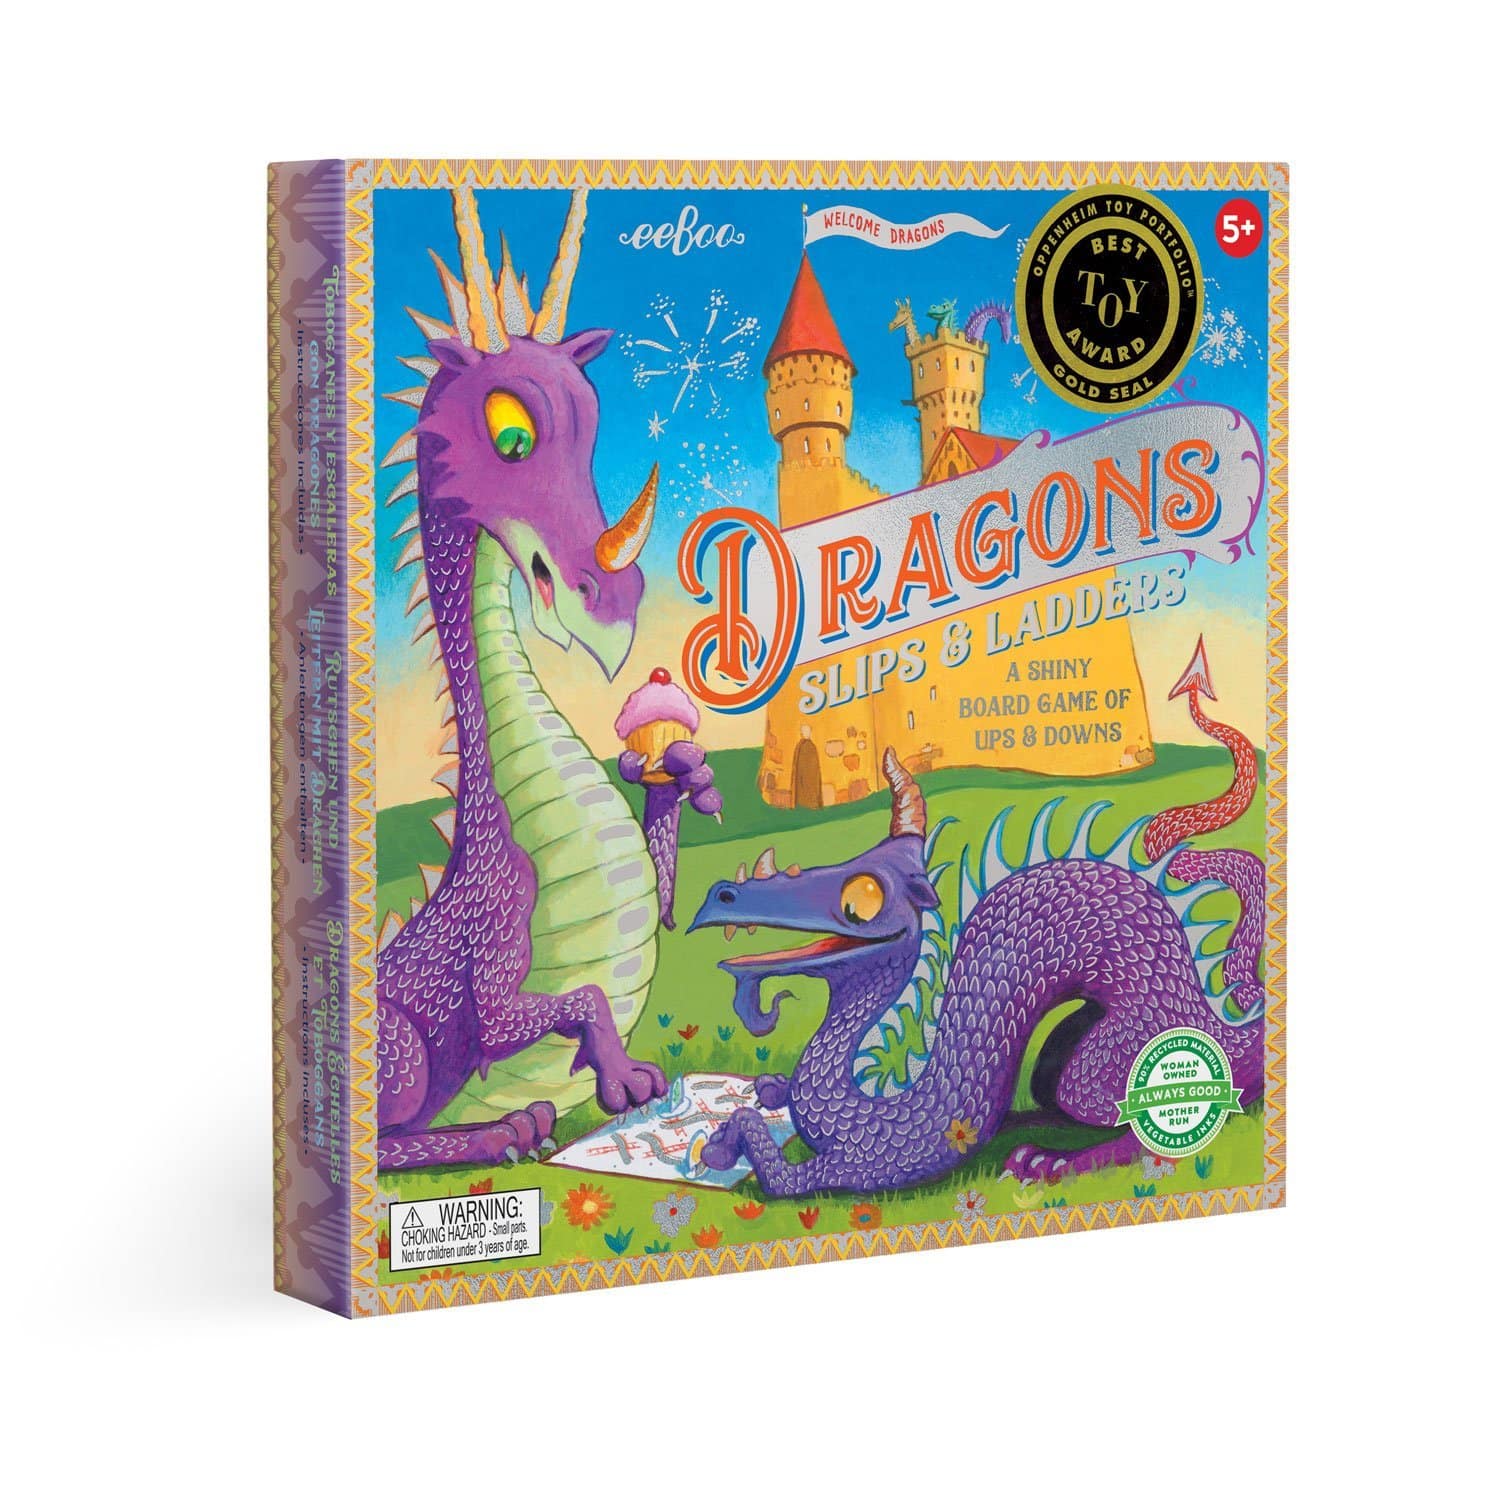 Dragons Slips and Ladders